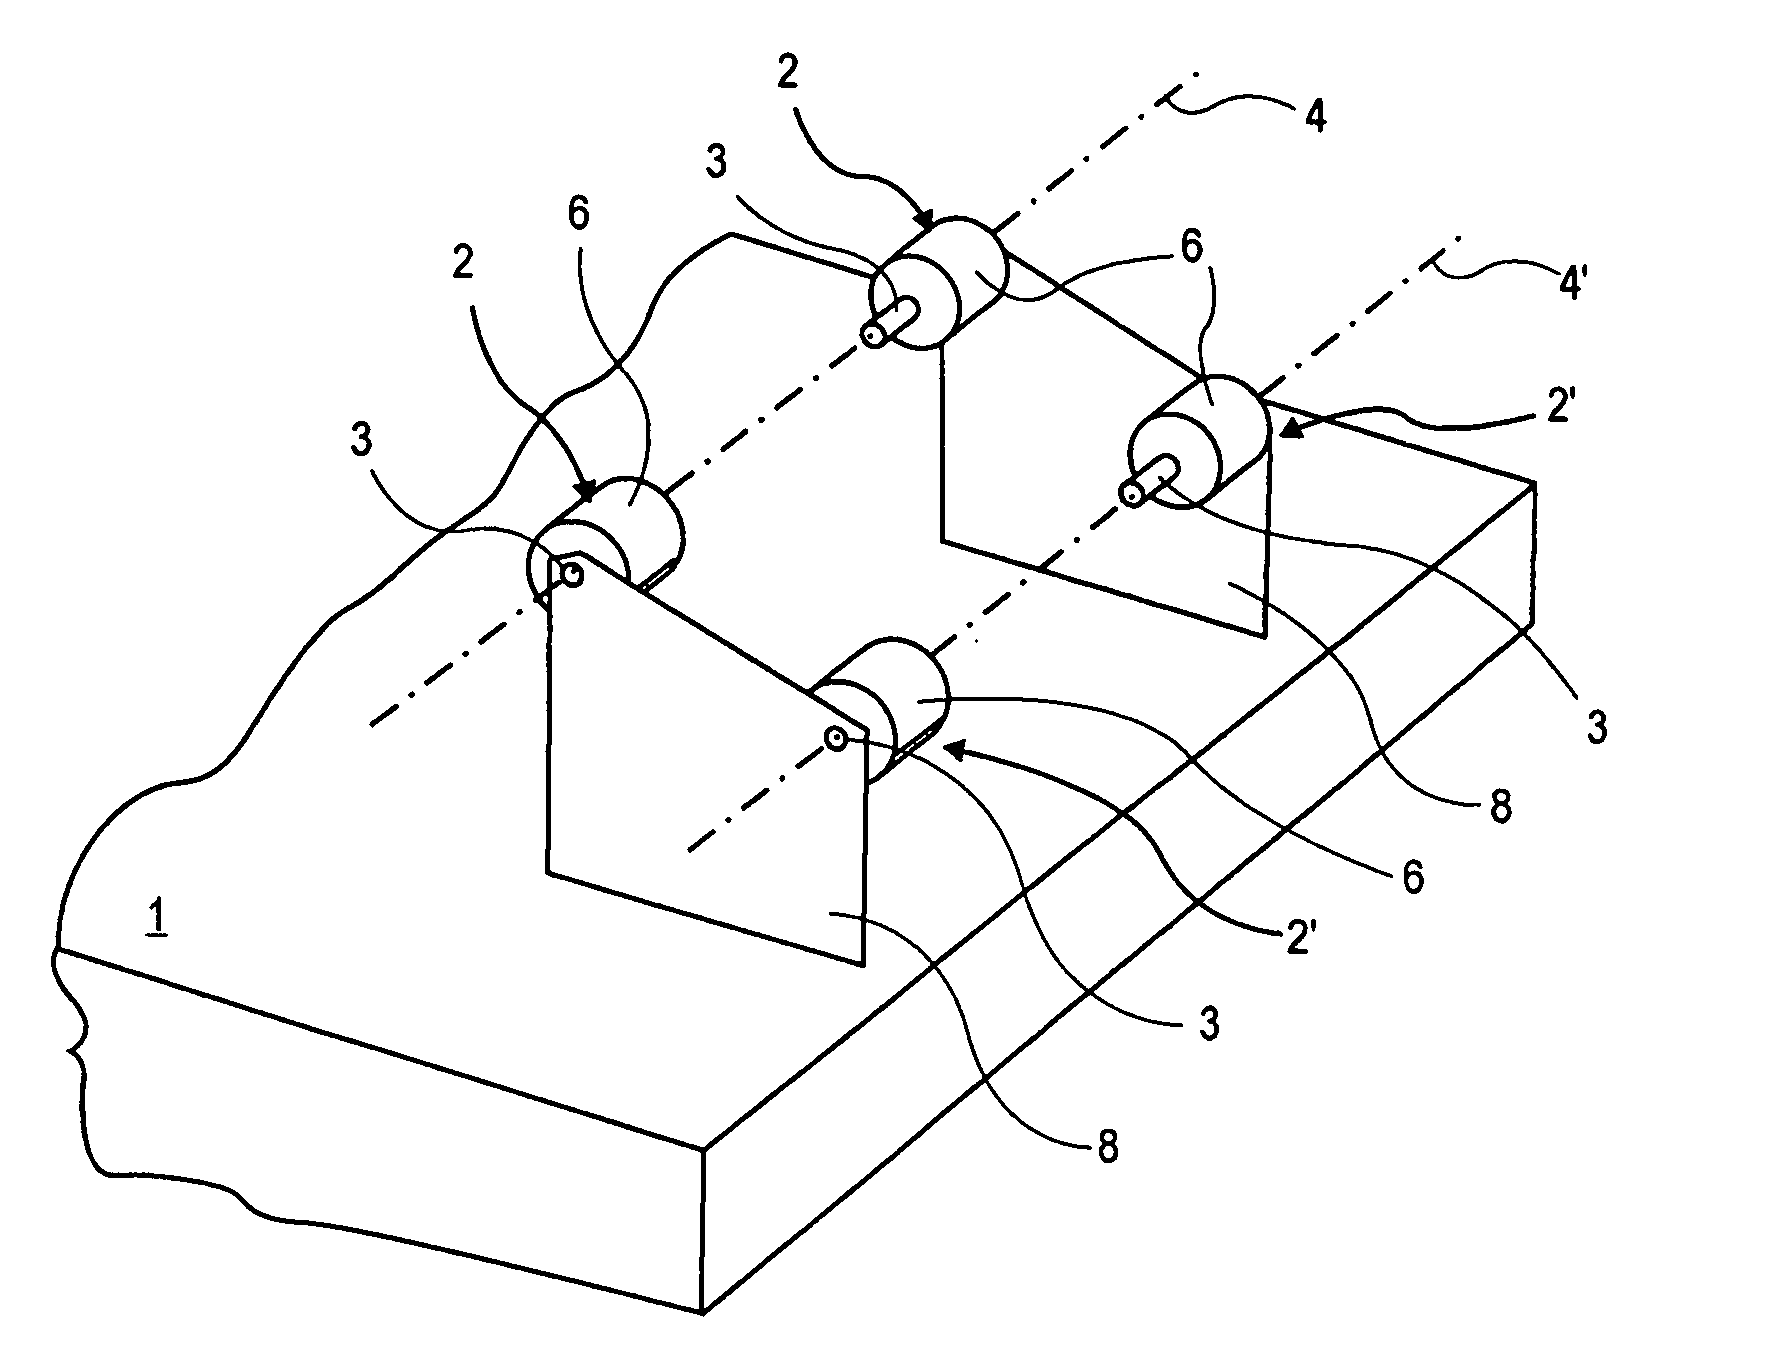 Vibratory damped guide lever for a working device